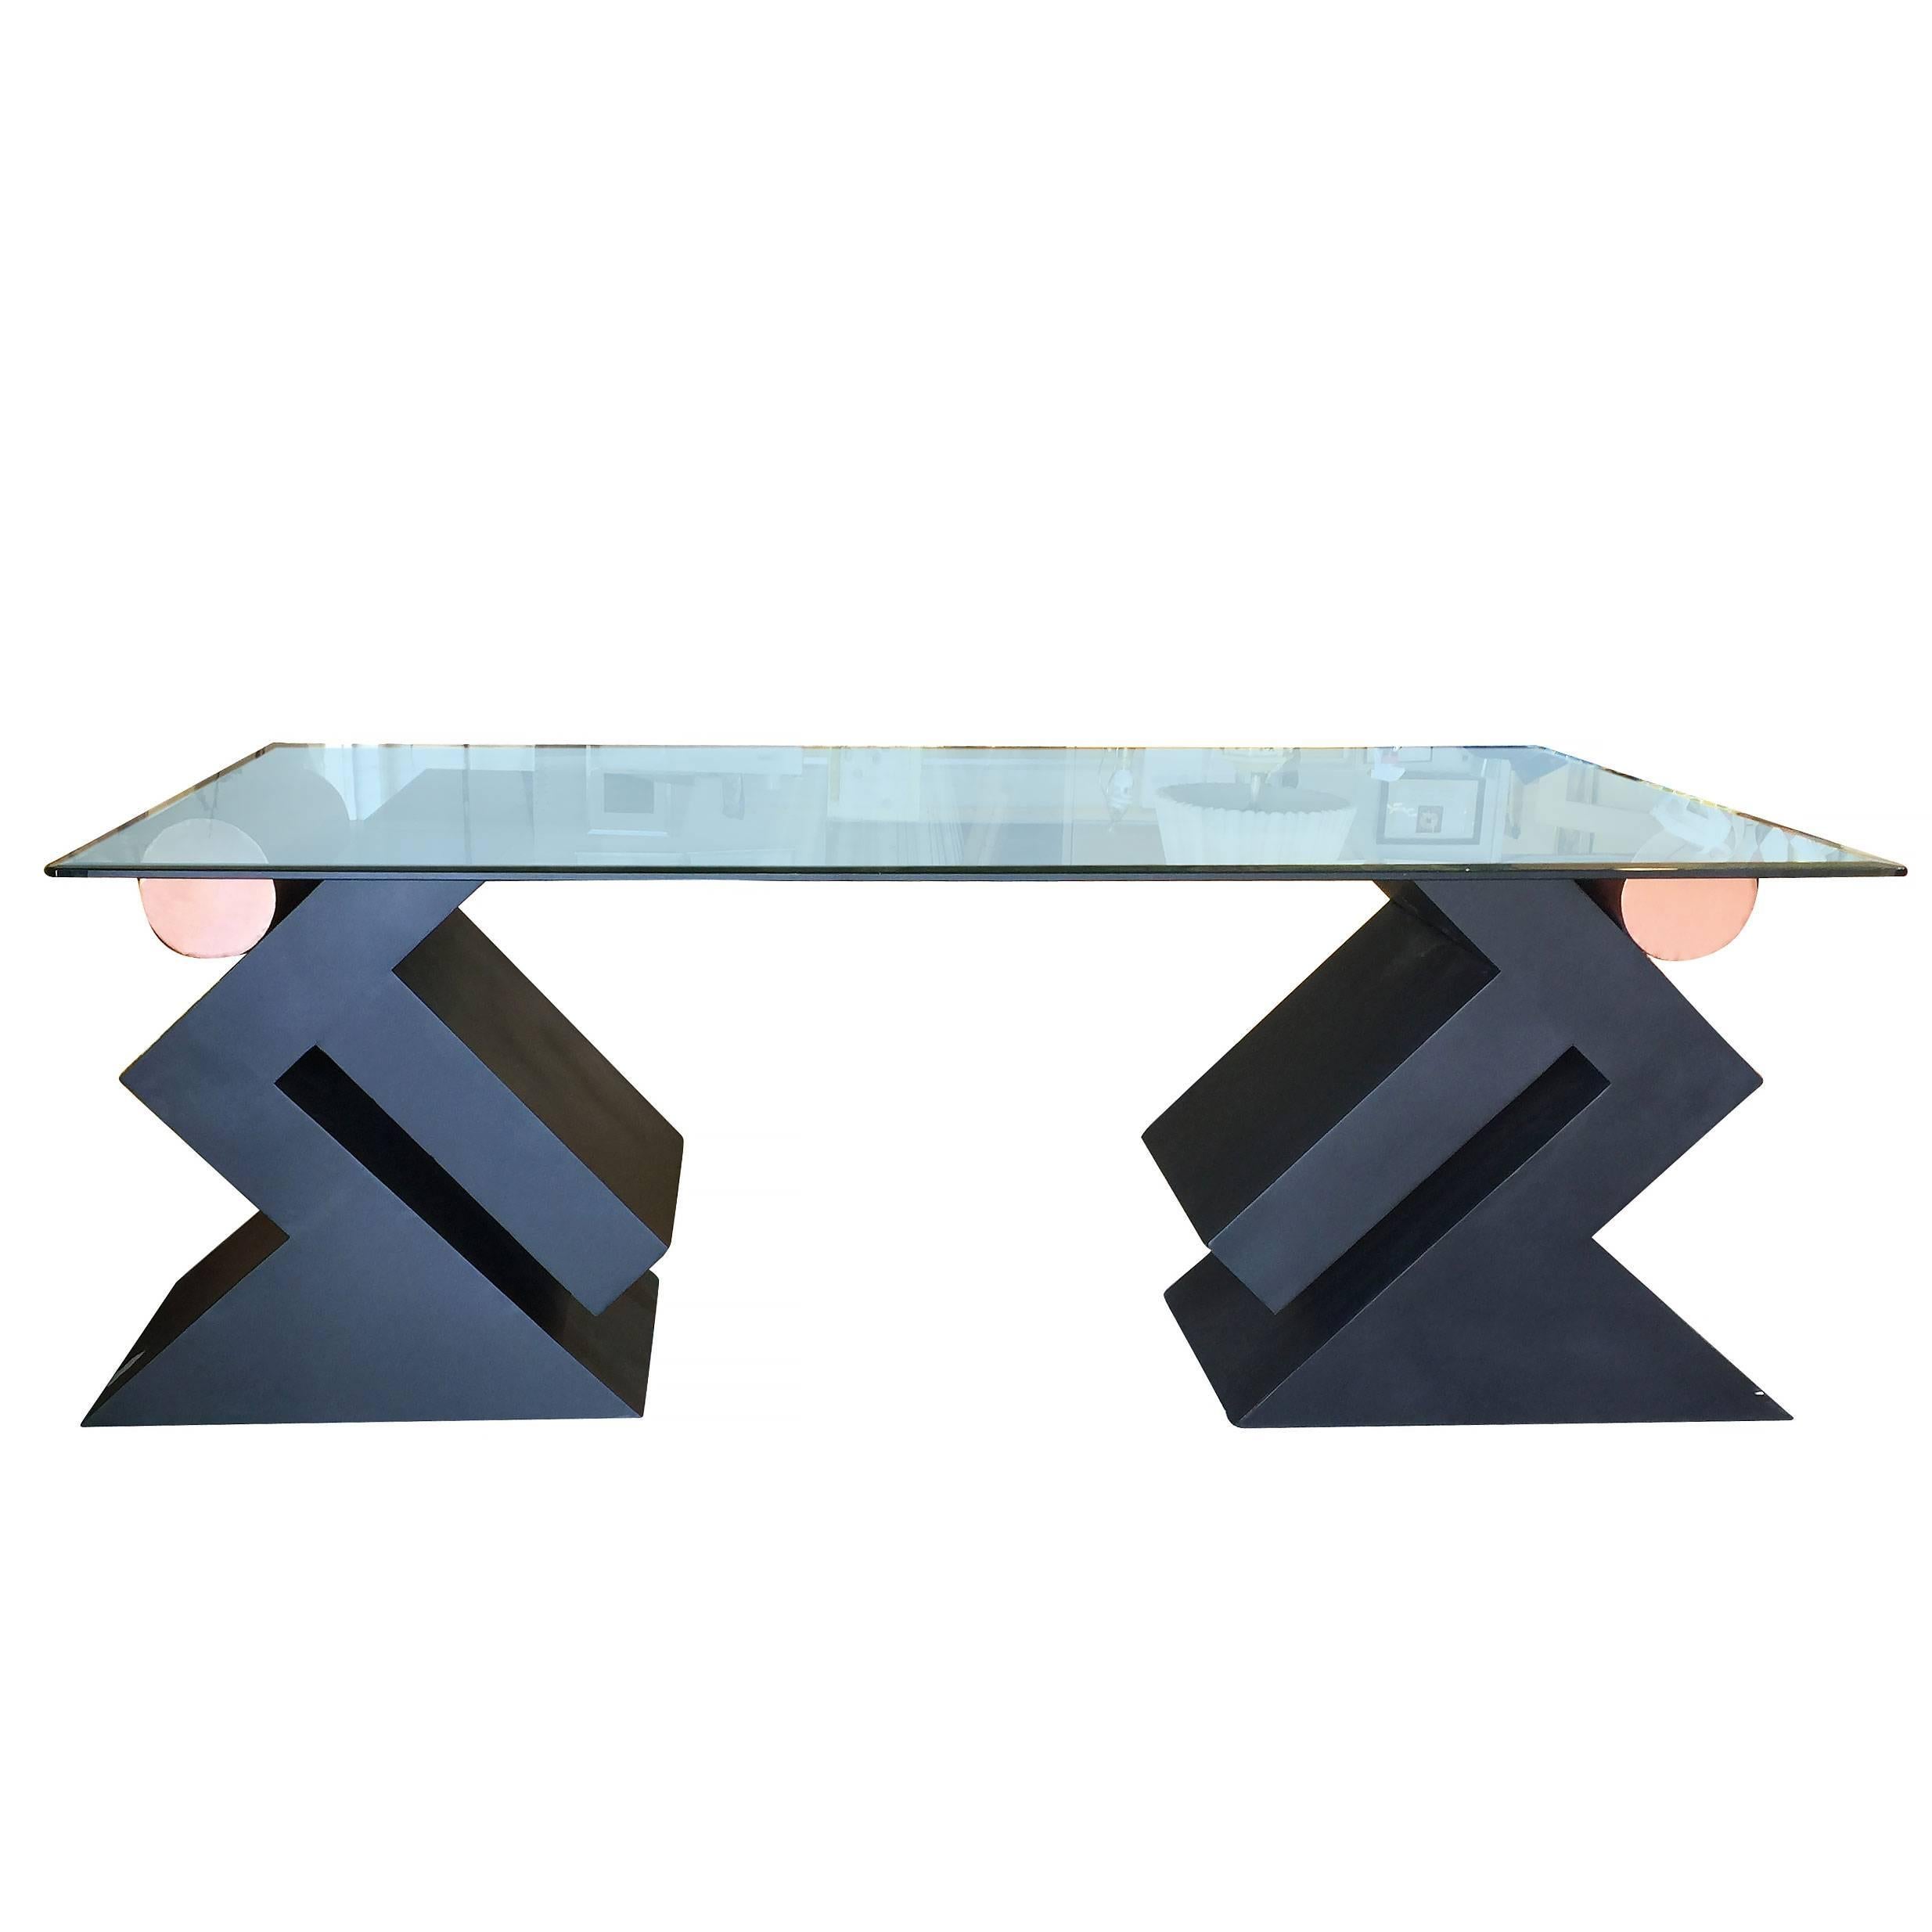 Large Memphis style glass top executive desk with two unique abstract steel sculptural bases and a large 72